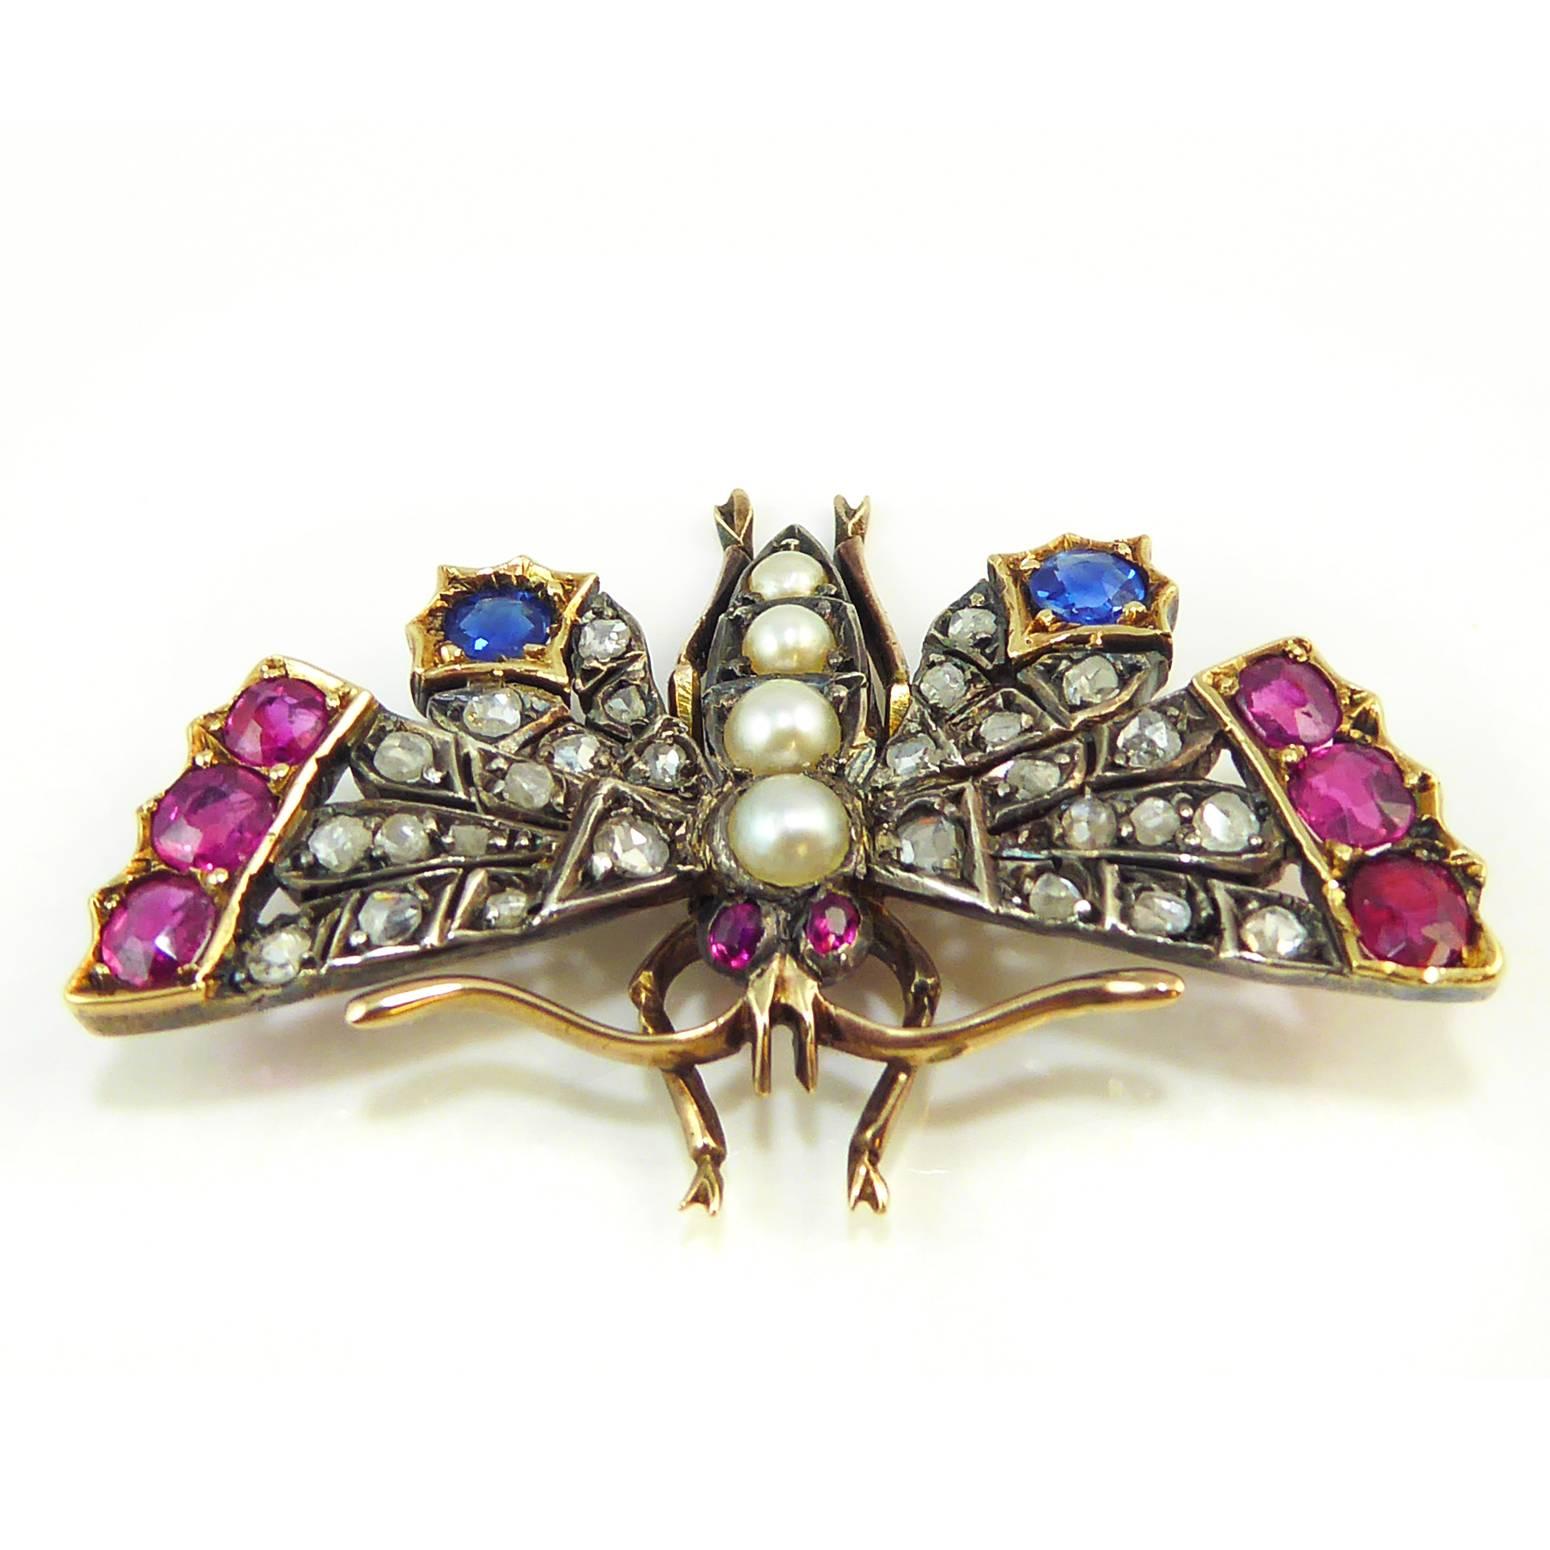 An exceptionally detailed and fine quality Victorian butterfly brooch/pendant.The wings are beautifully crafted and adorned with old rose cut diamonds with ruby and sapphire accents to the tips.  The butterfly body has been created using quite